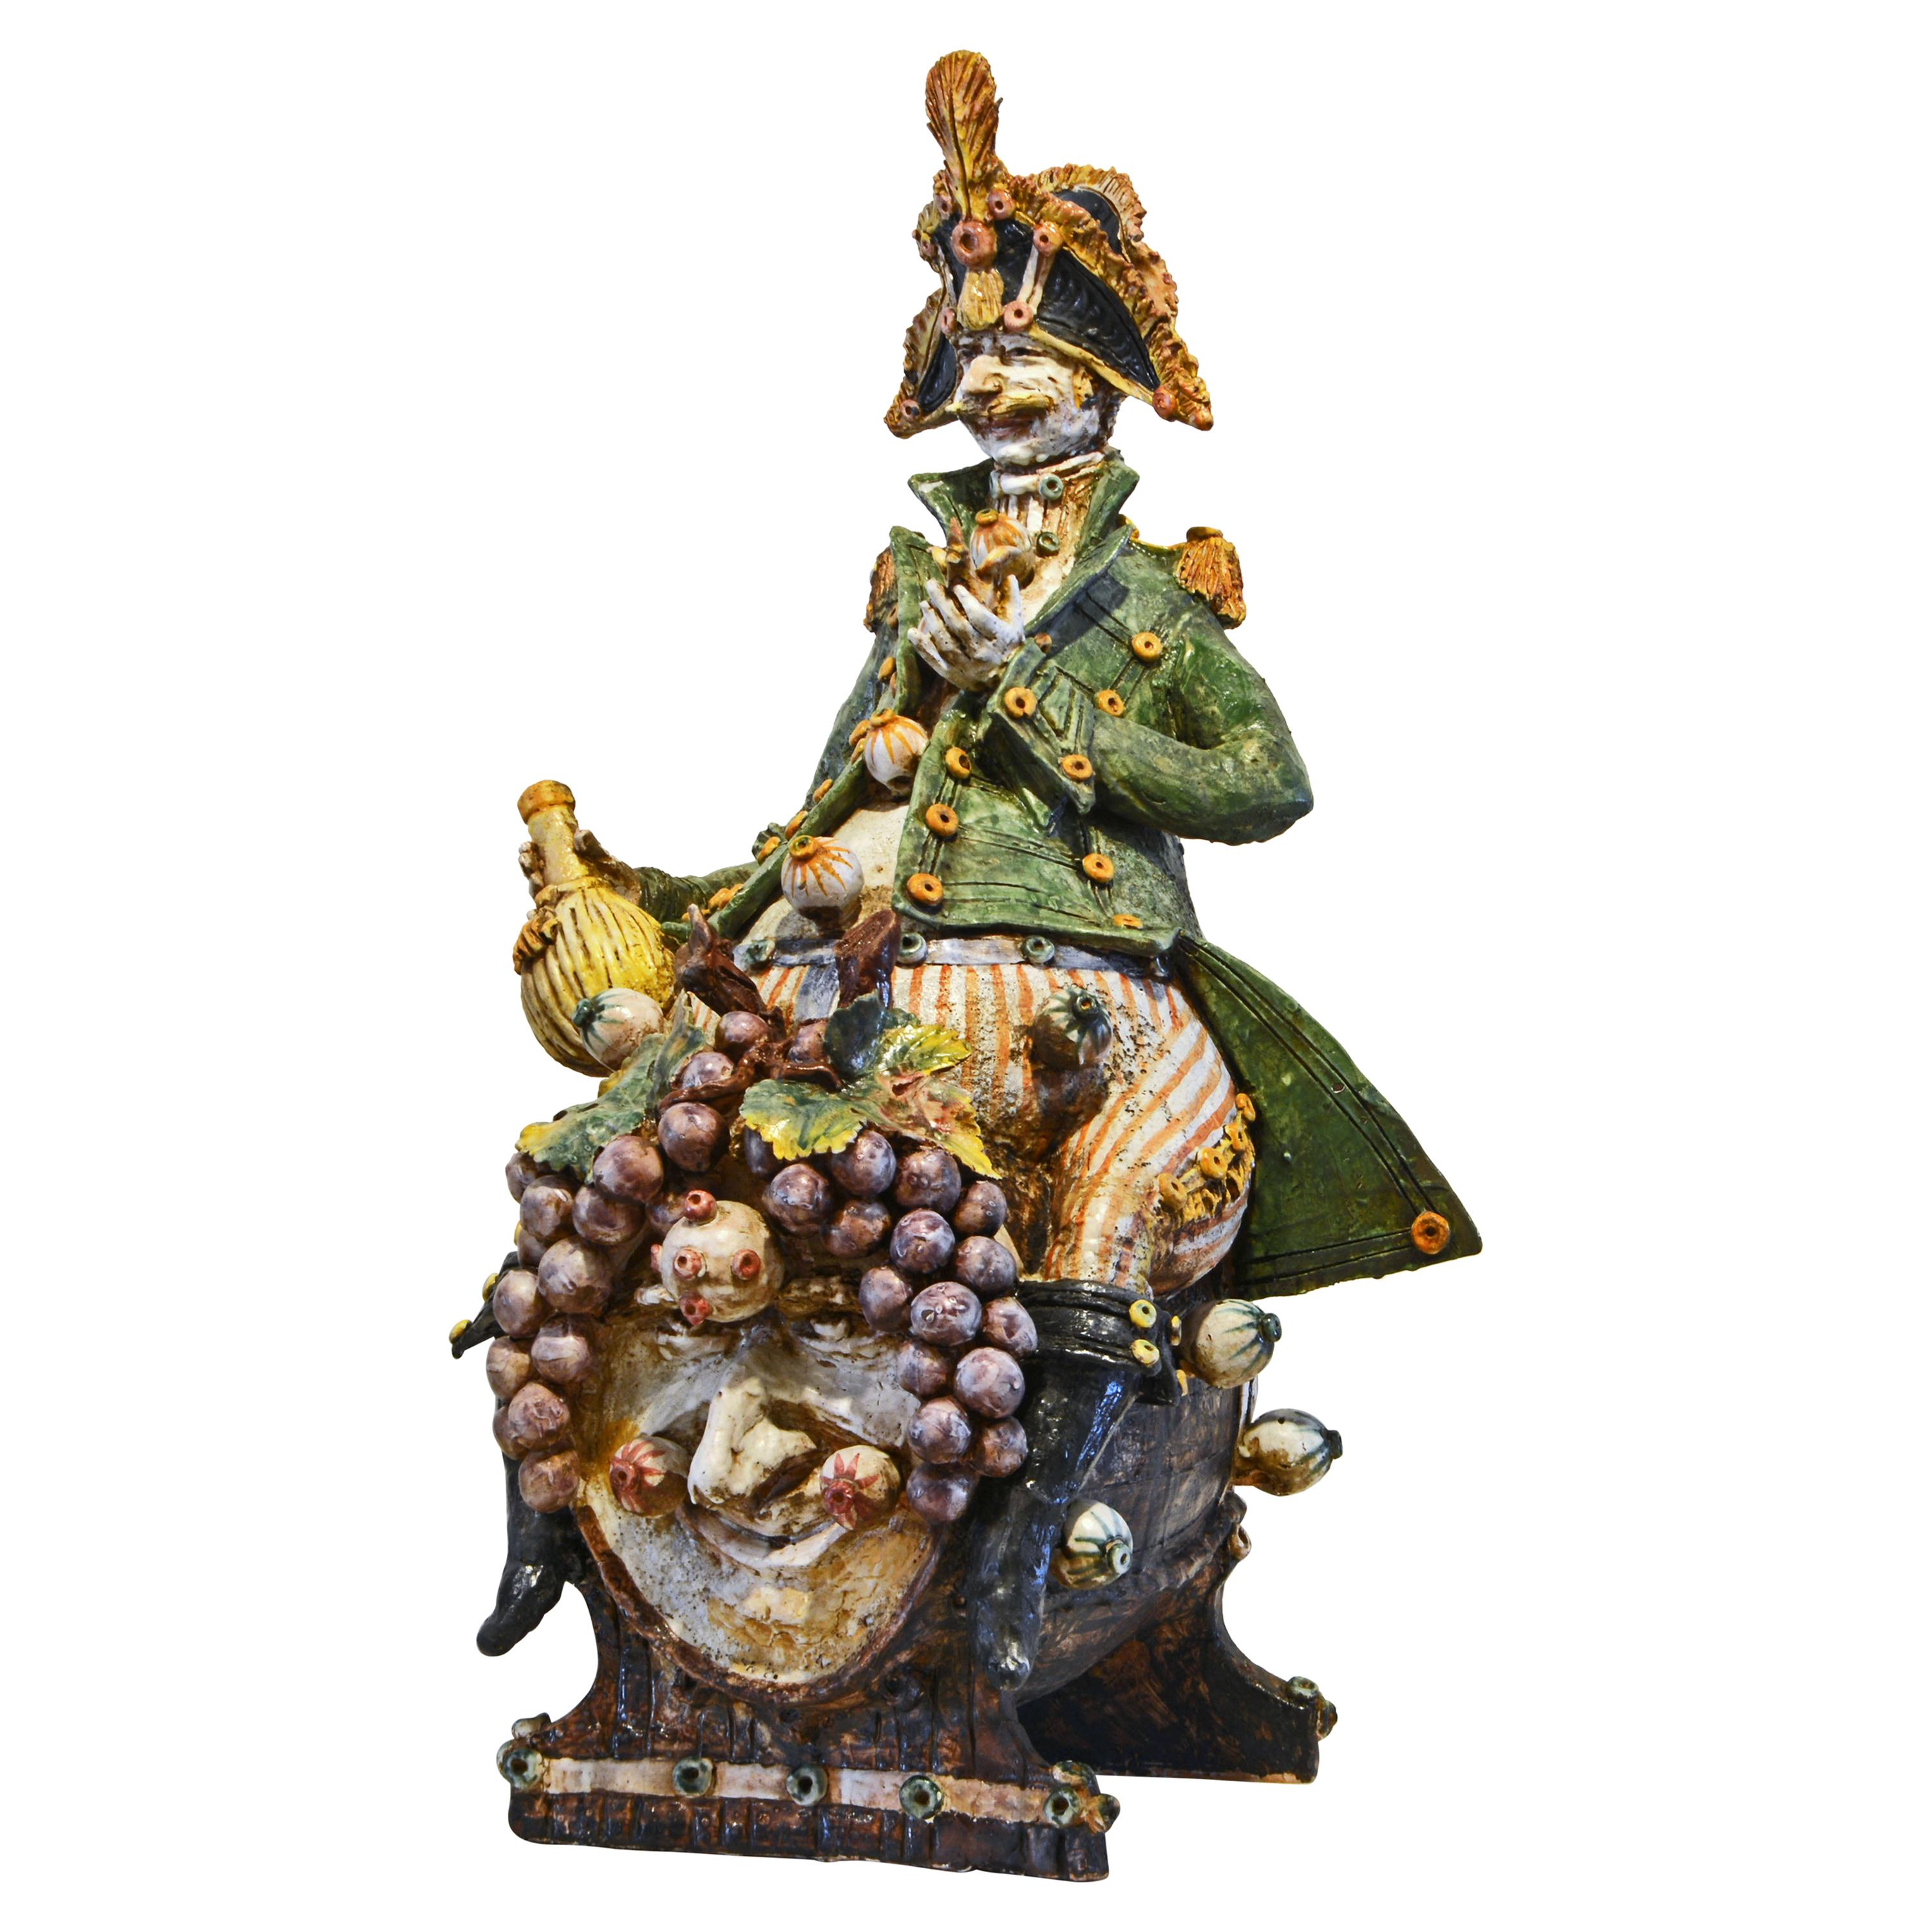 Large Italian Glazed Ceramic Sculpture of a Drinking General by Diego Poloniato